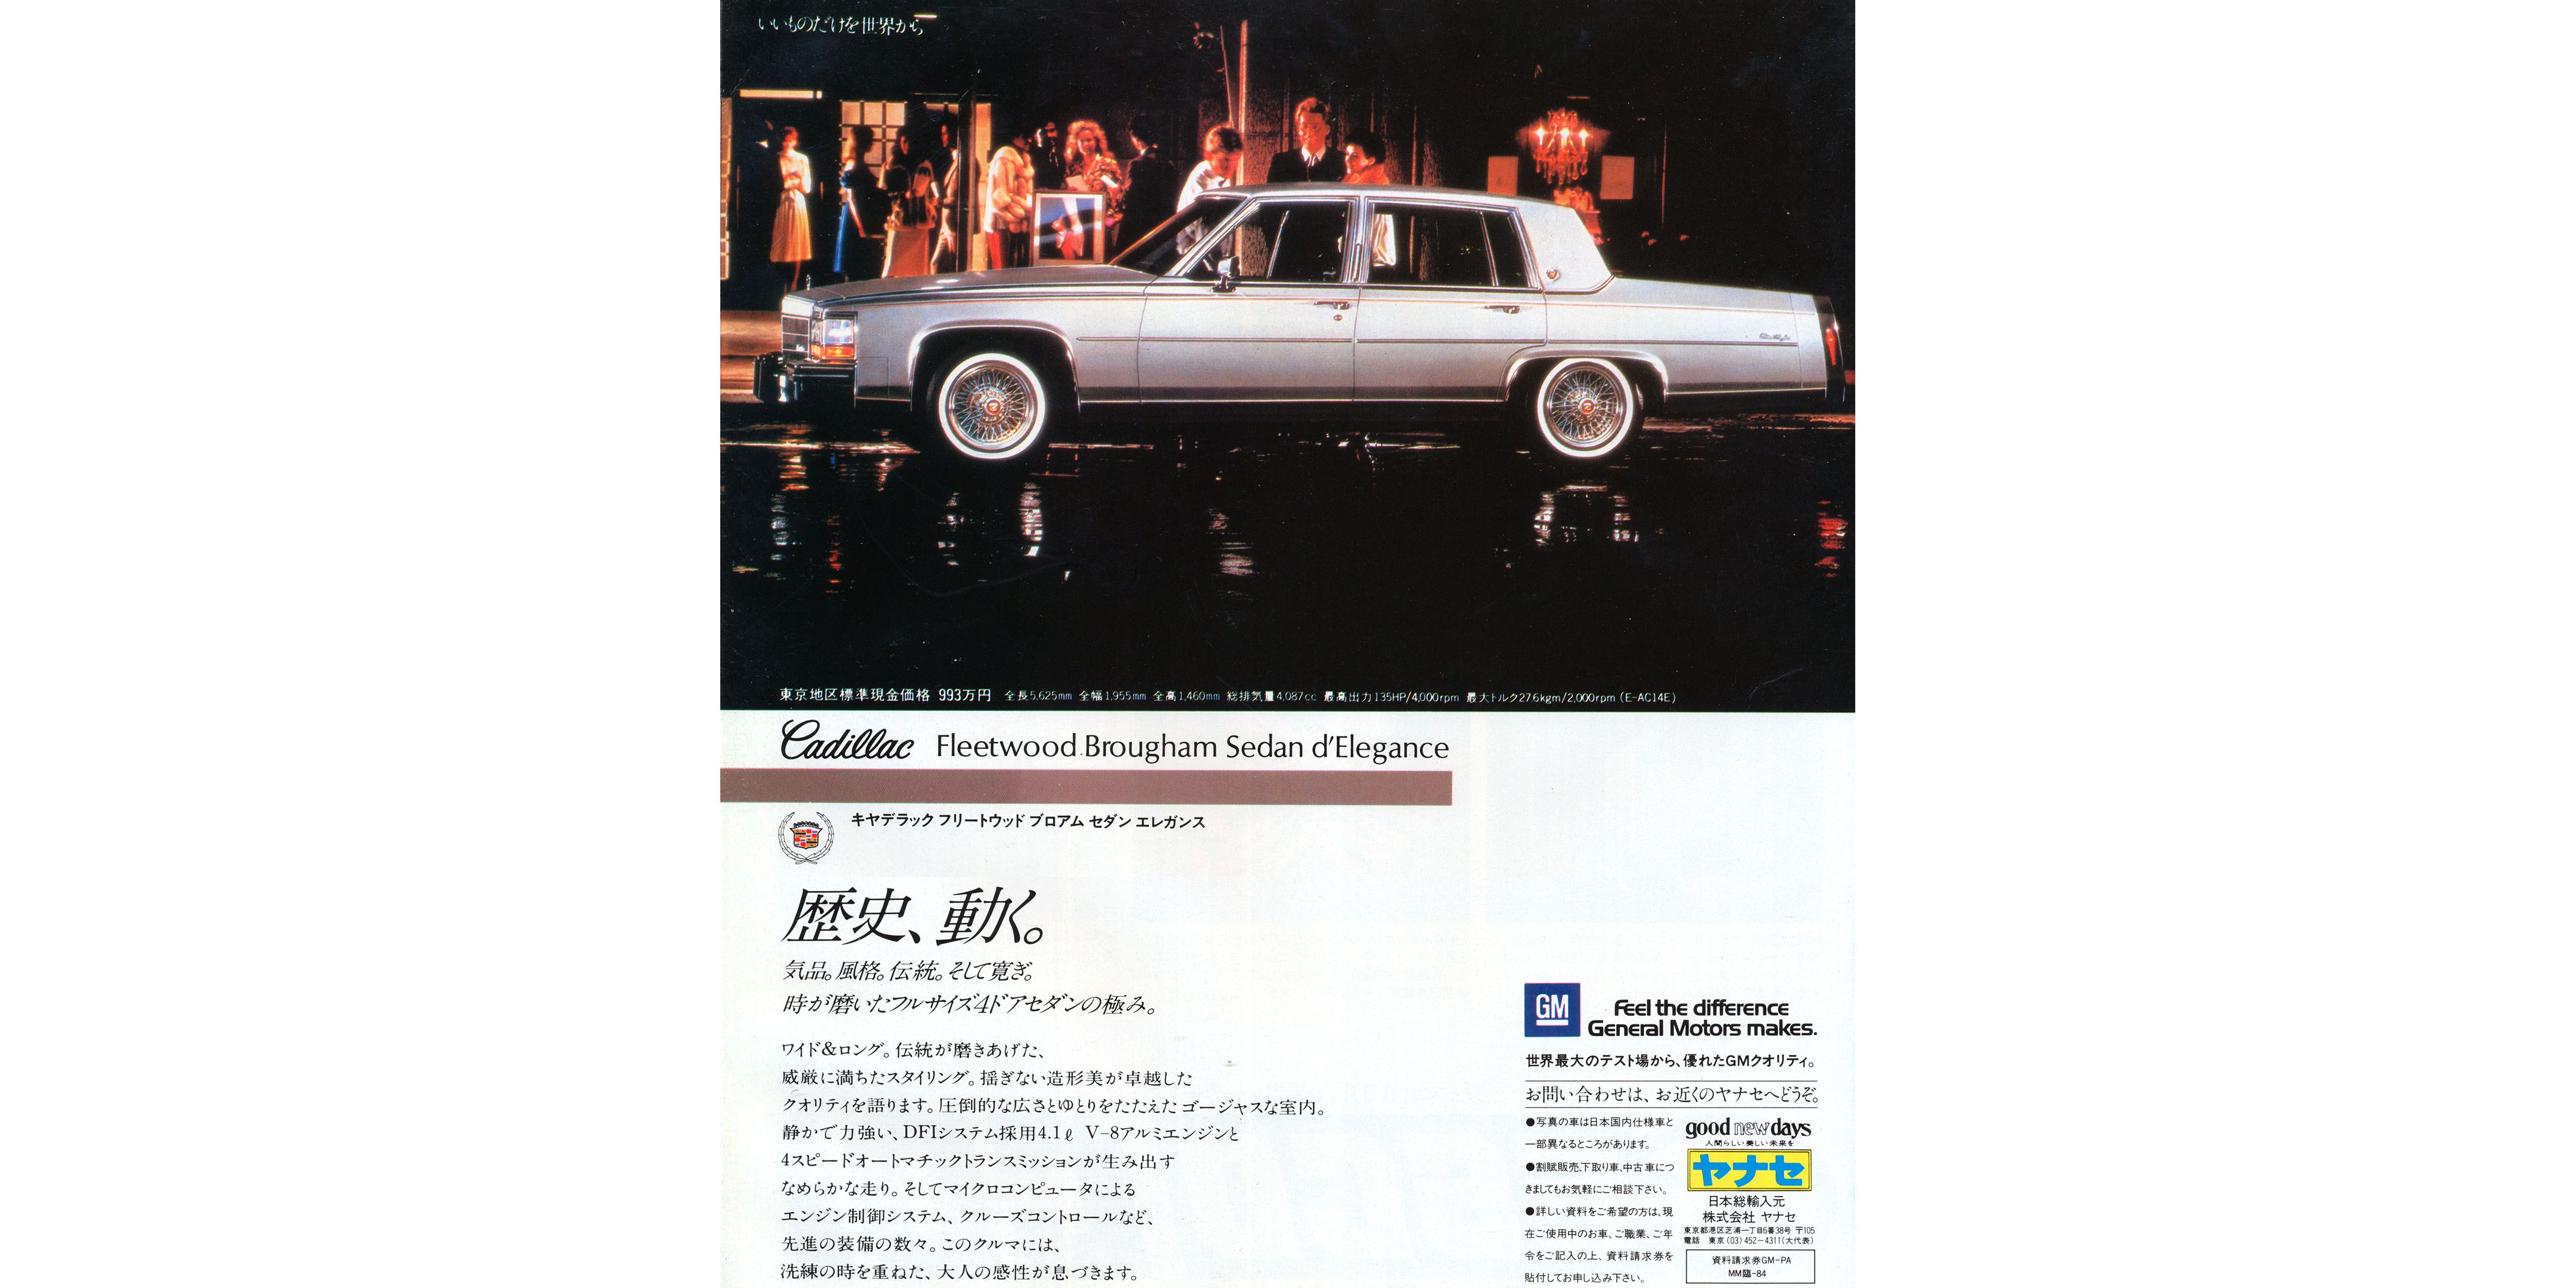 1984 The Cadillac Fleetwood Brougham D Elegance Is Big In Japan